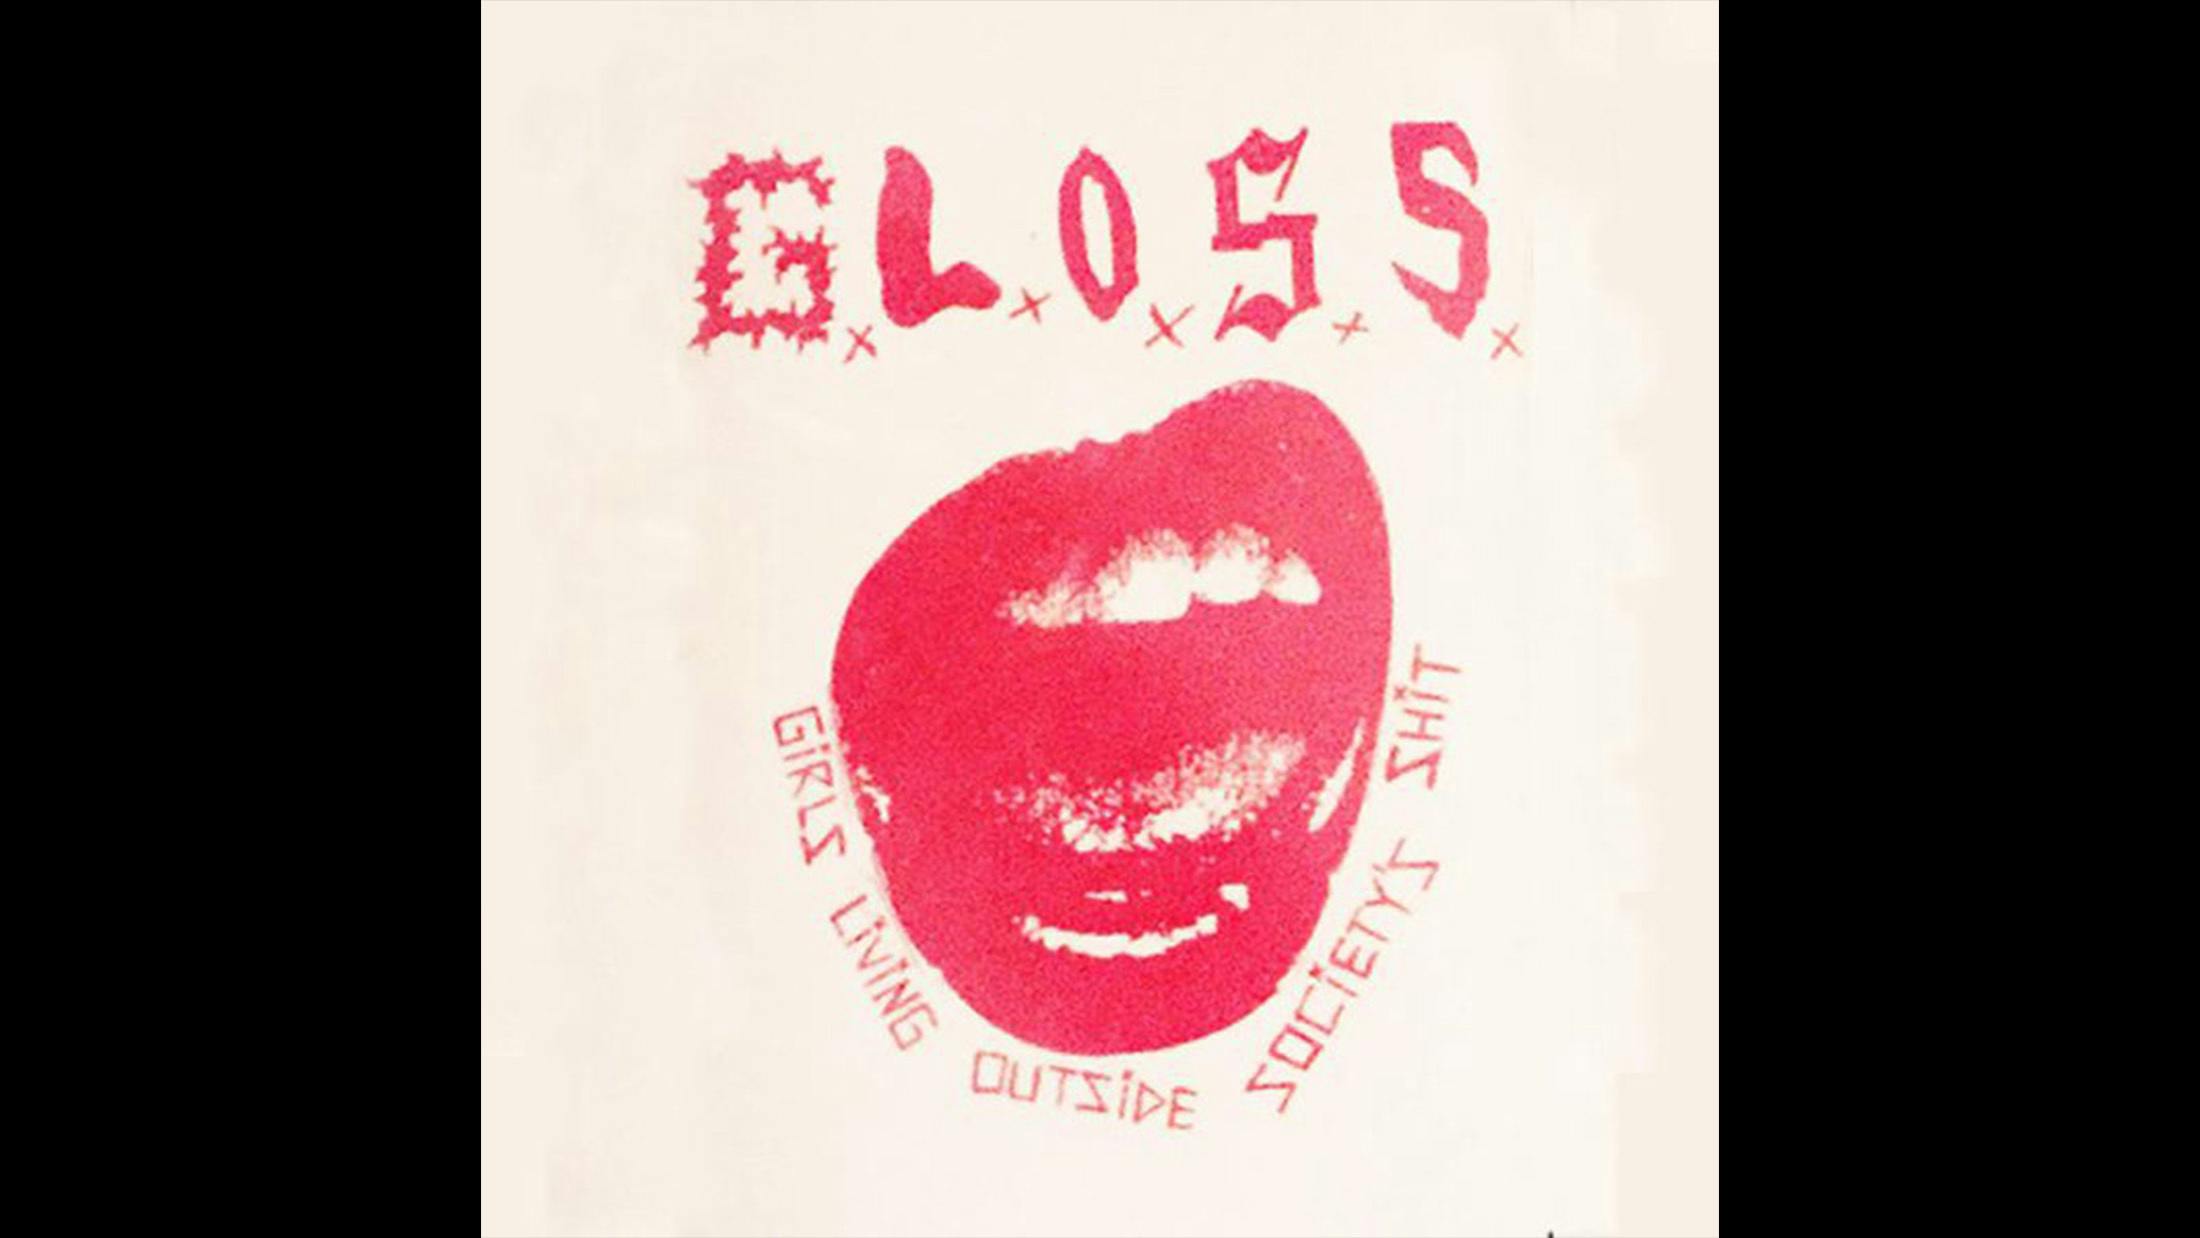 A sadly all-too-short lived queercore crew with several transgender members, G.L.O.S.S. gained a degree of infamy in 2016 when they turned down a lucrative offer to release their music on Epitaph, shortly before disbanding. But as proved on this Molotov cocktail of a debut, their music deserves a greater legacy than a mere footnote in punk history, such is its clenched-fist fury and palpable desperation for societal change.